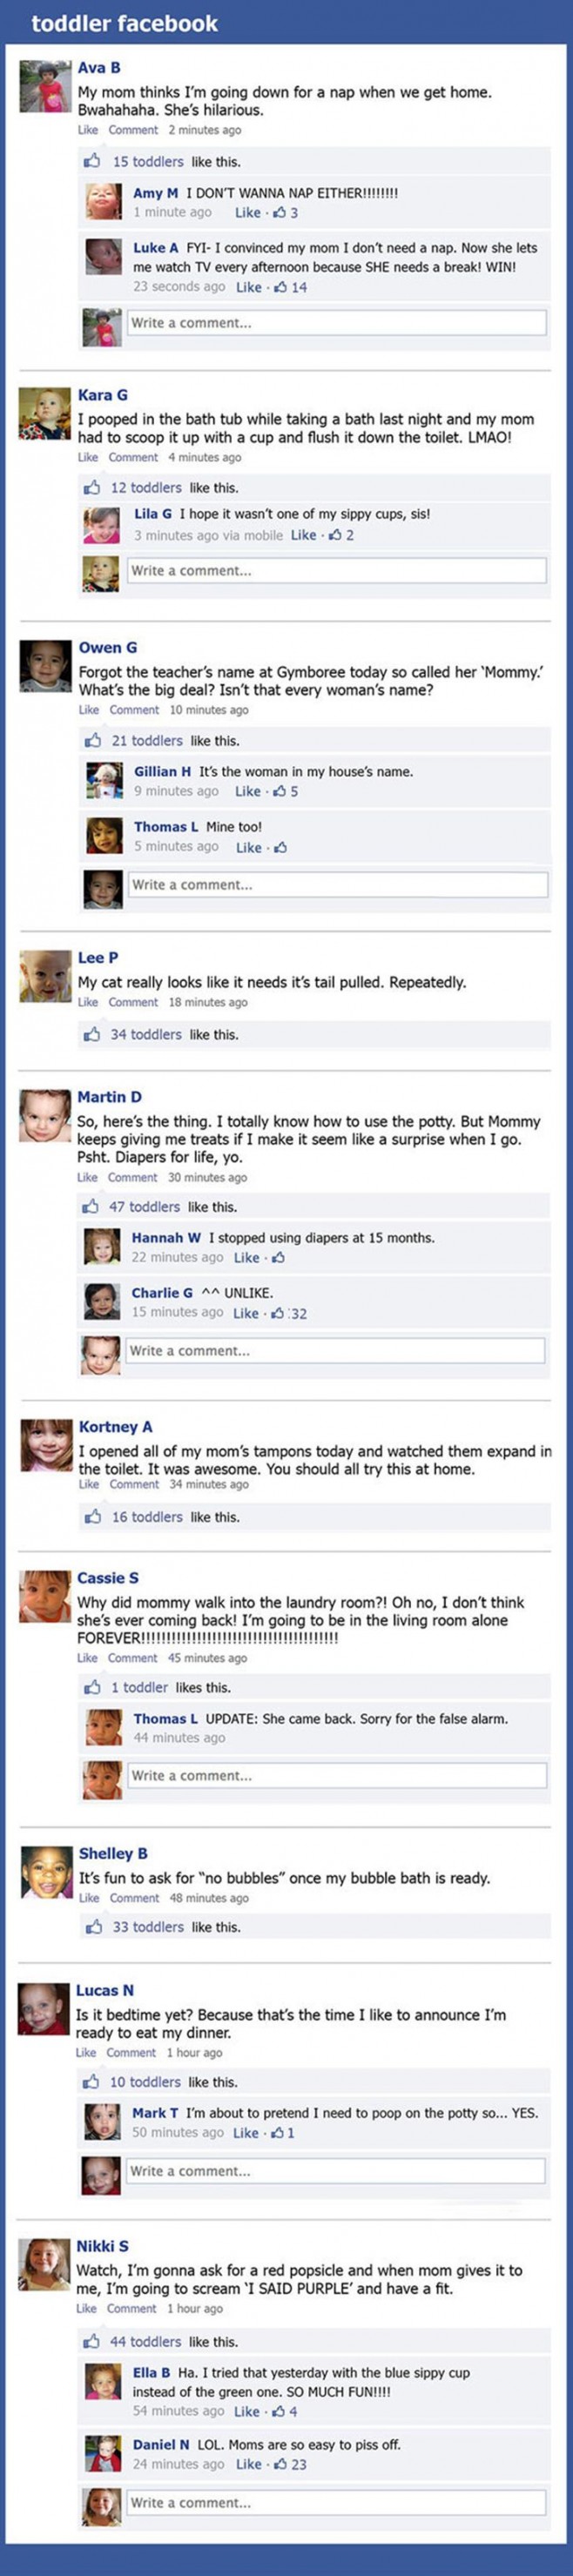 If toddlers could post on Facebook…